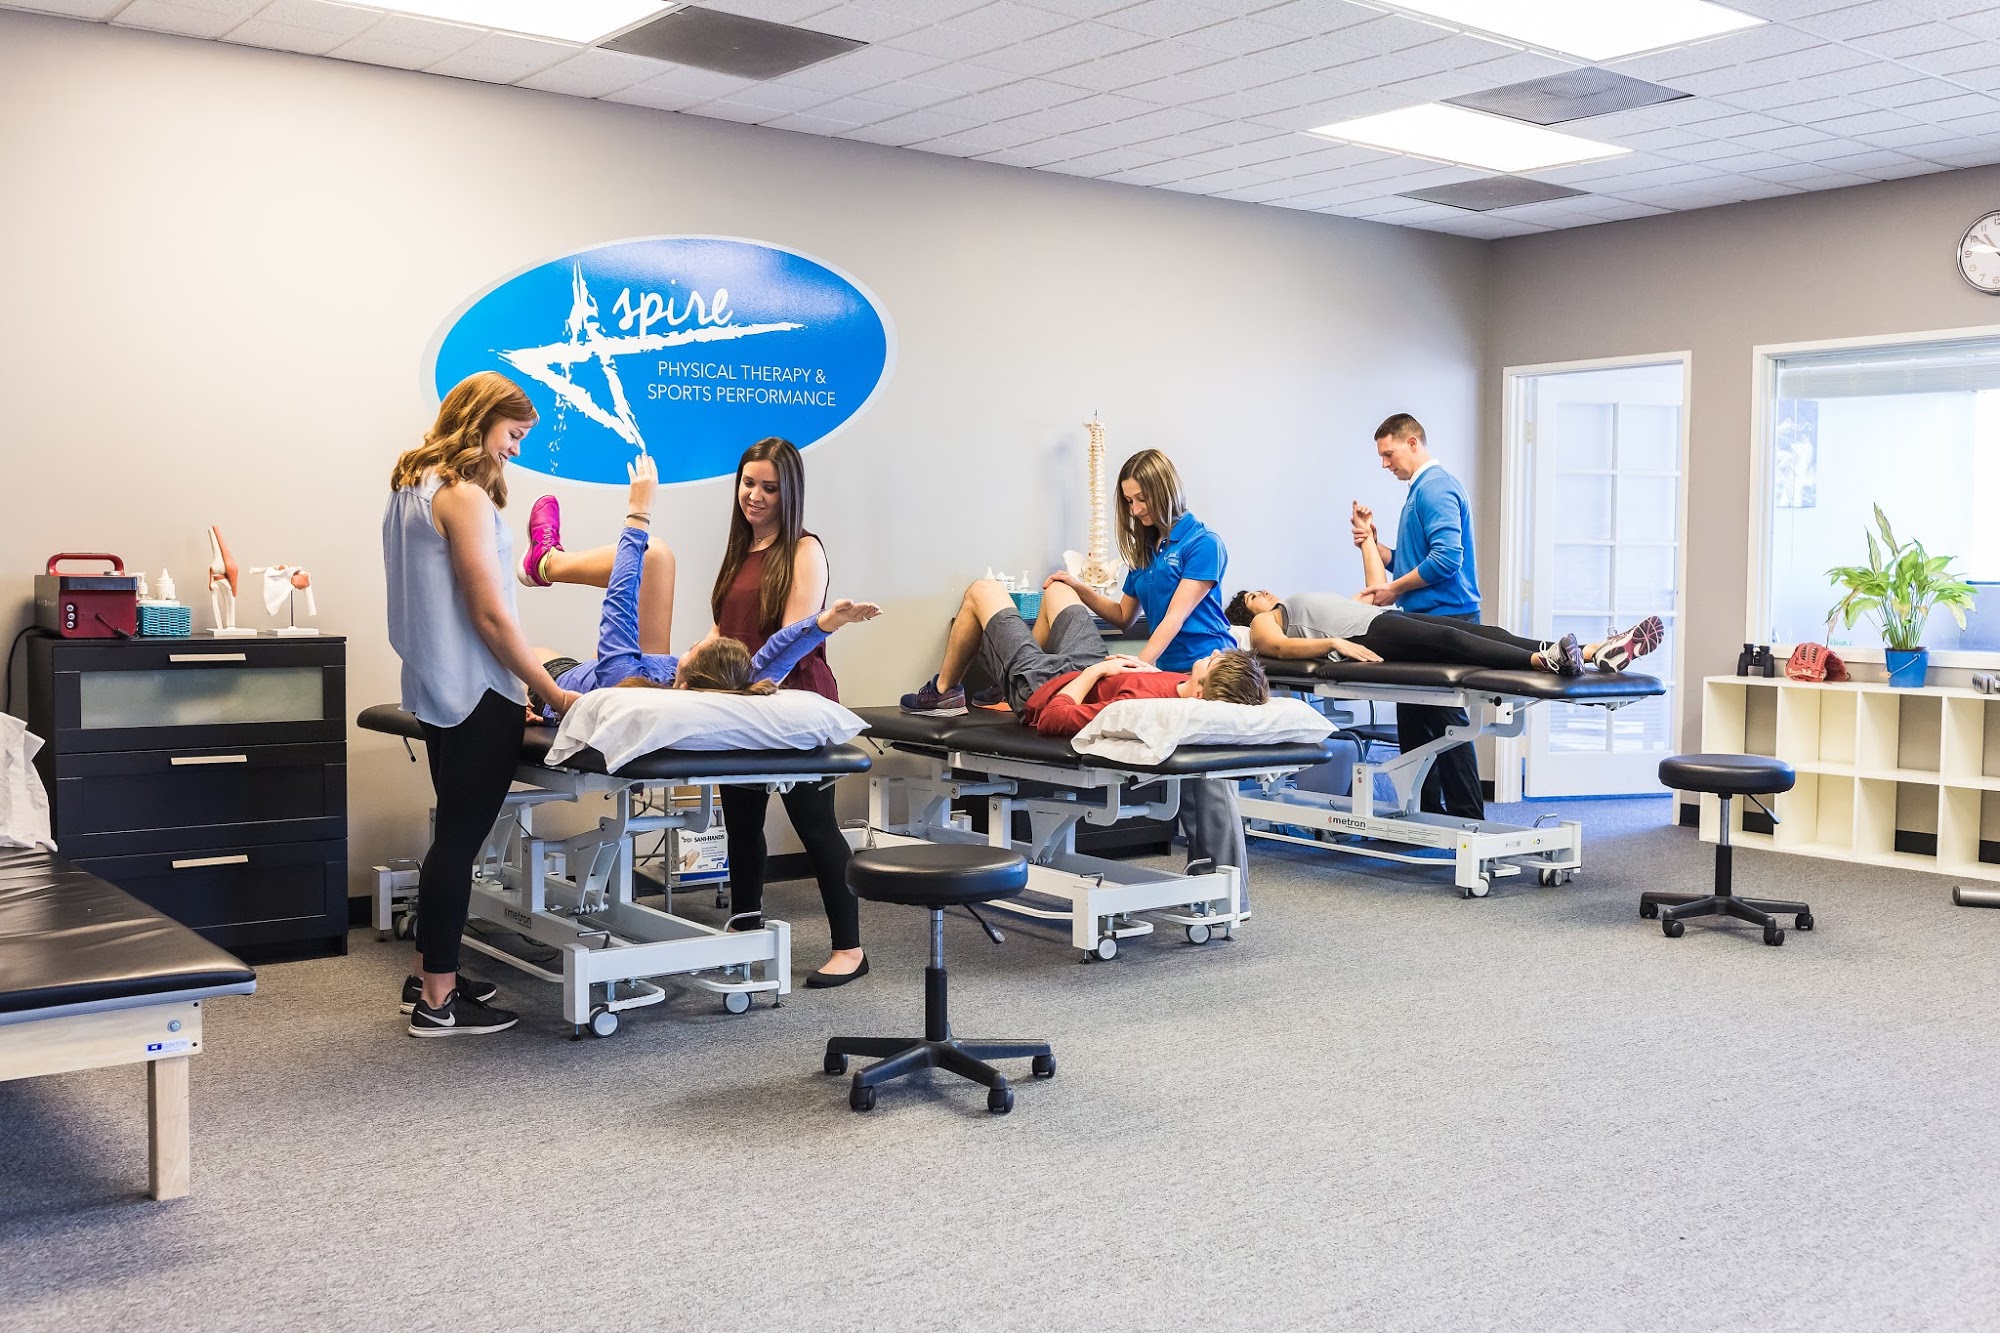 Aspire Physical Therapy & Sports Performance